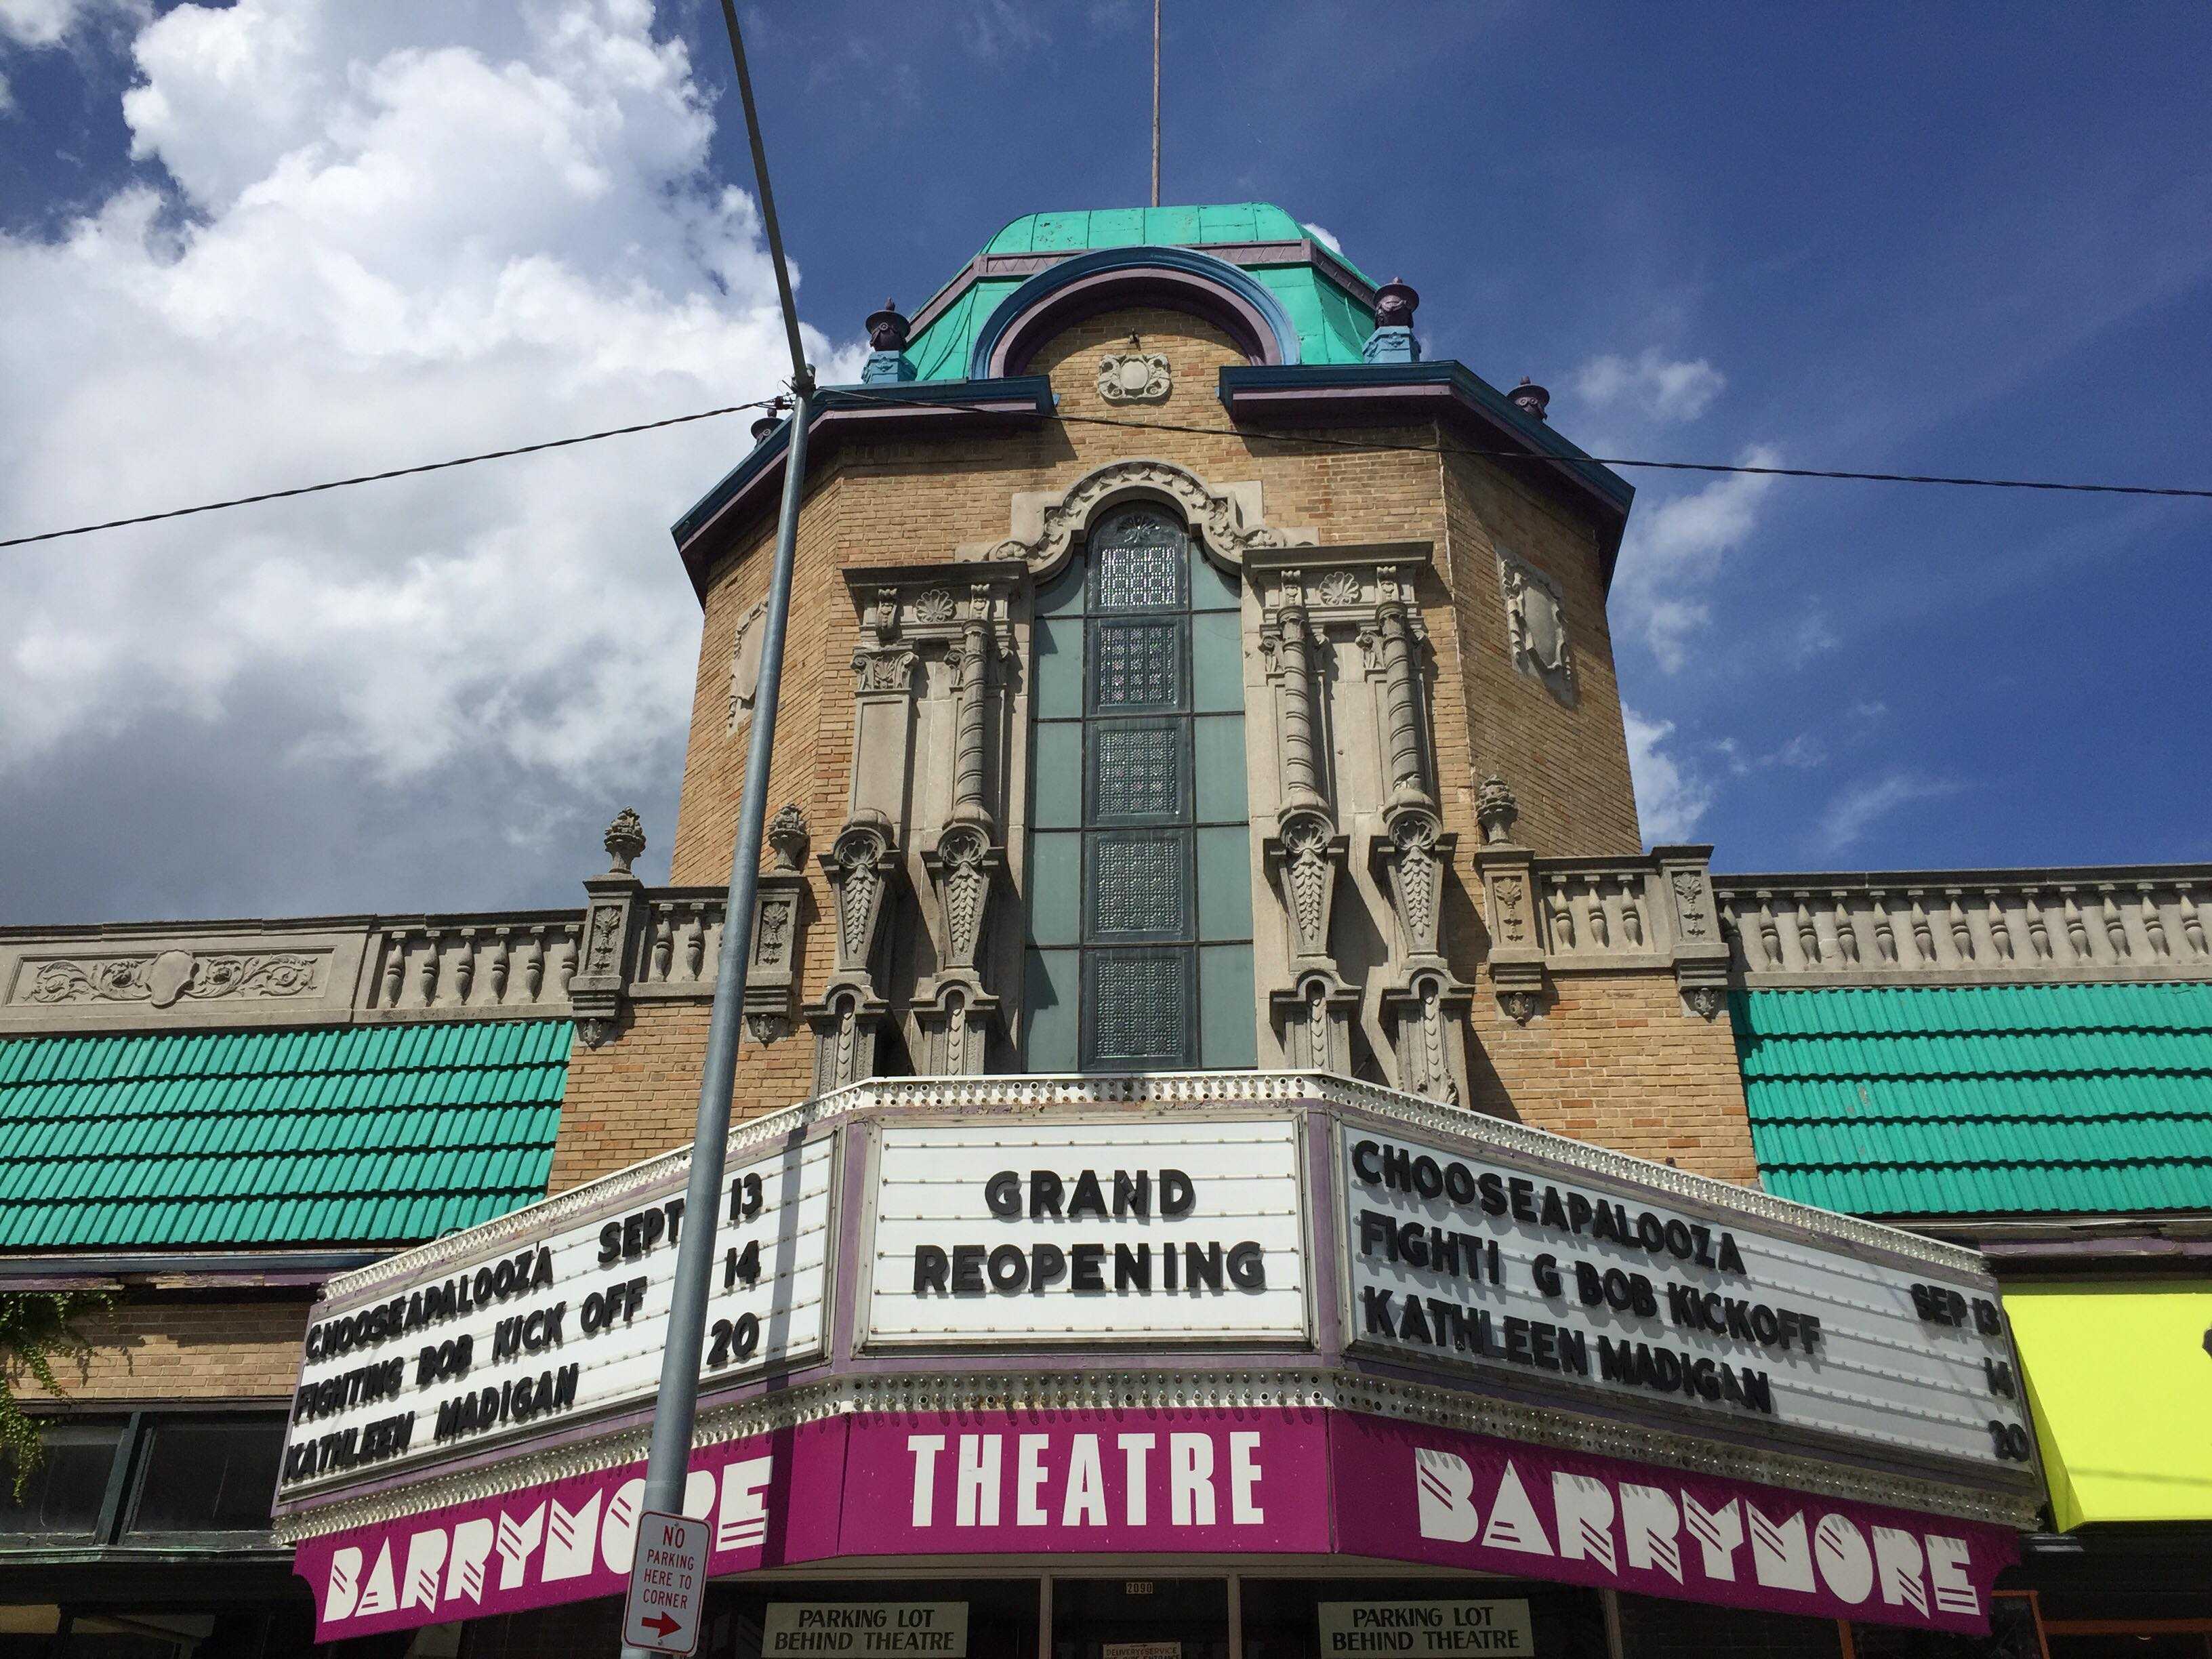 HUMP! film festival brings sex positivity to Barrymore Theater · The Badger Herald picture